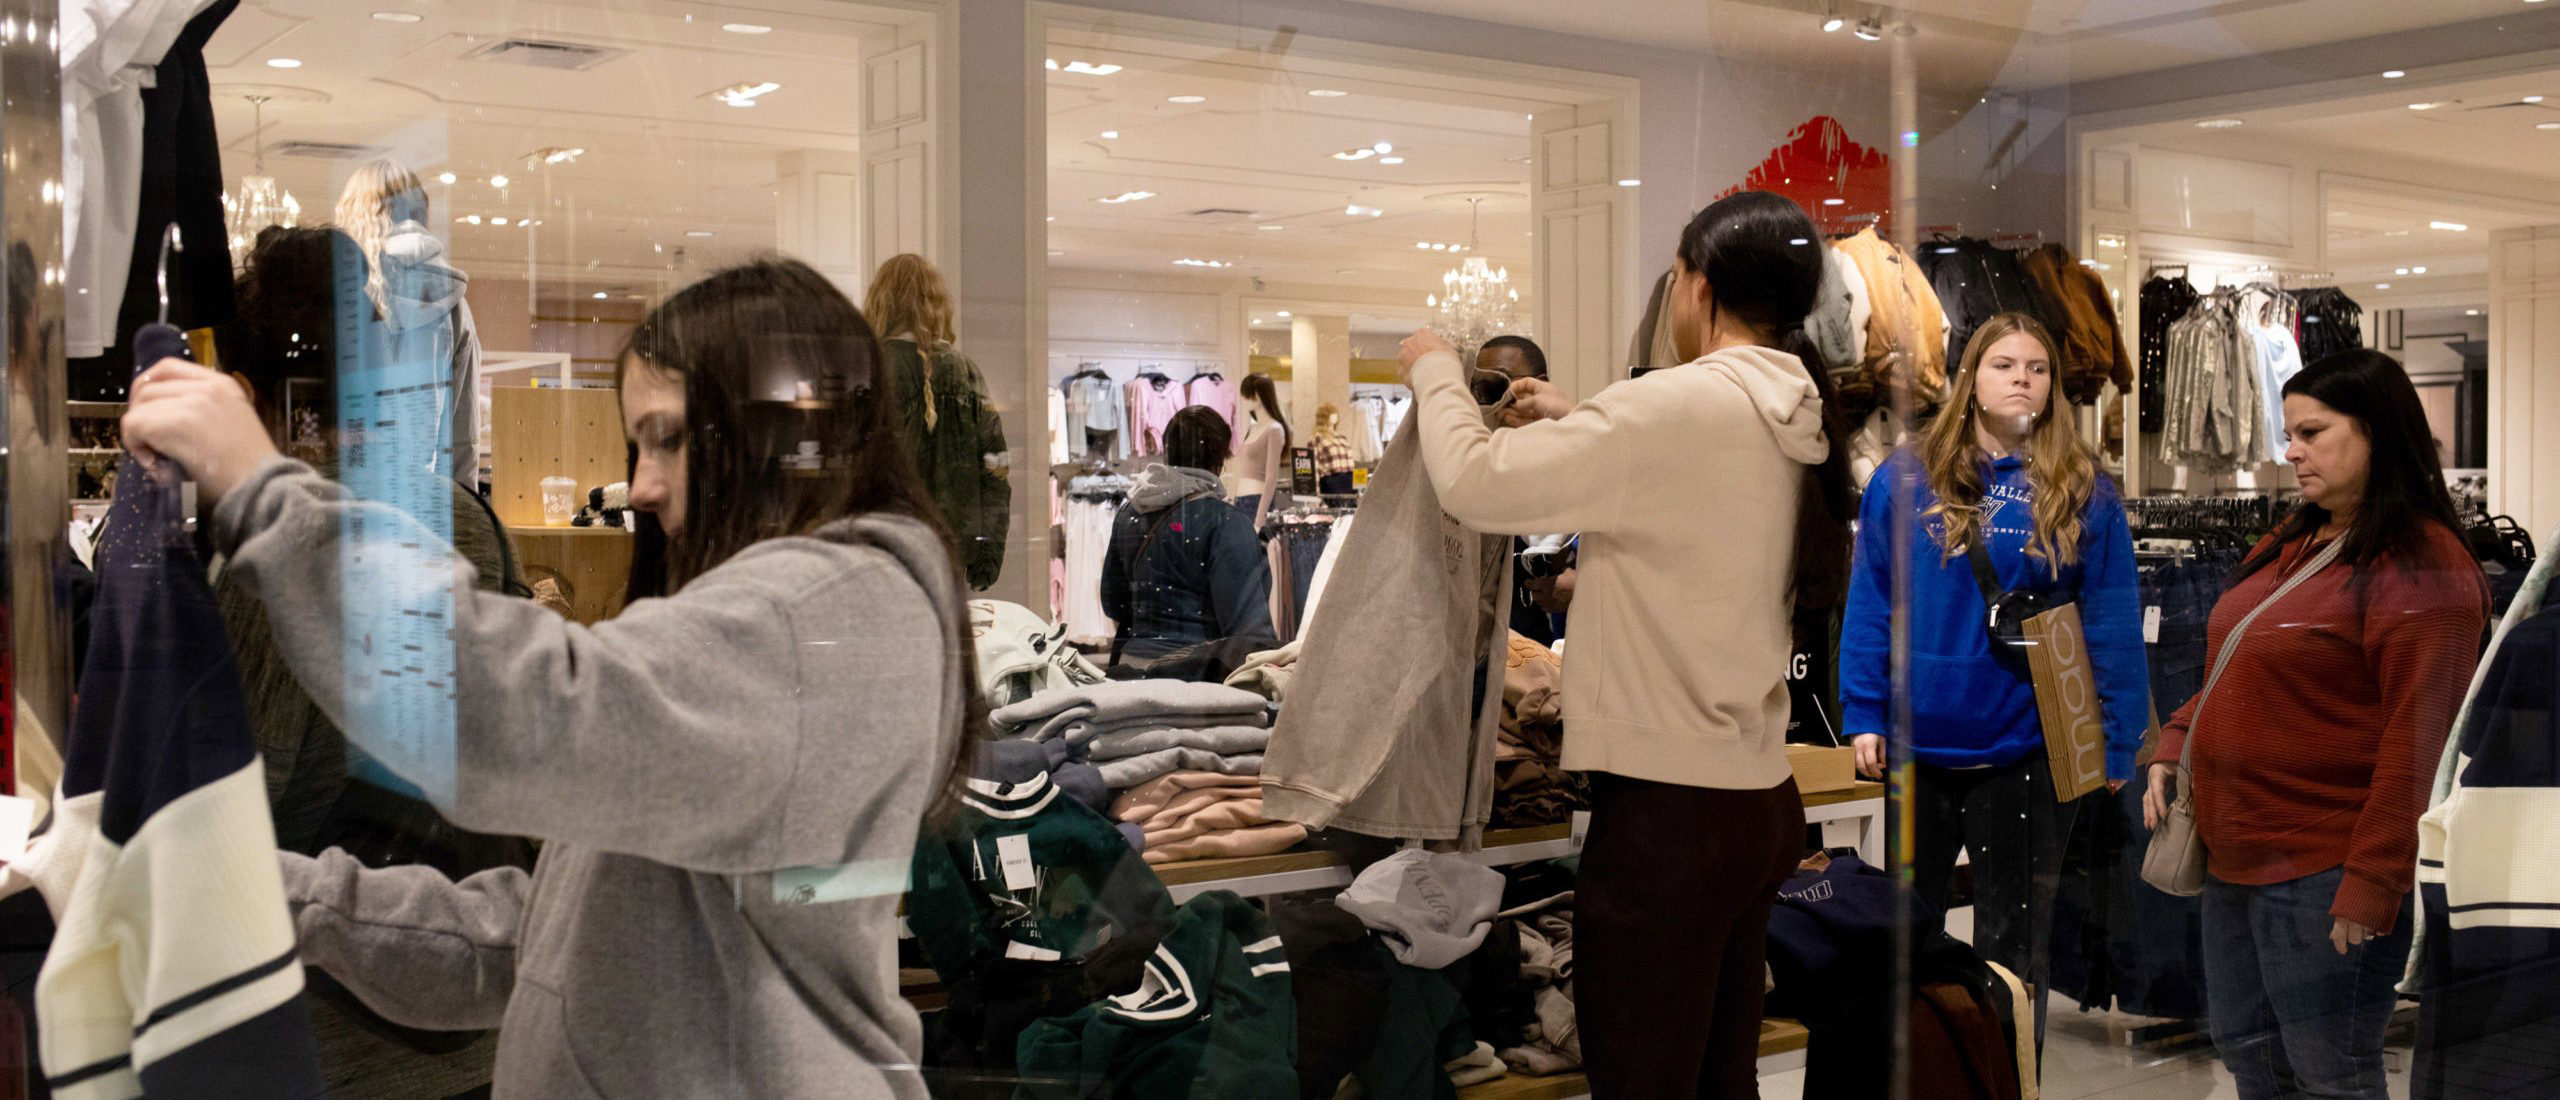 Consumer Spending Slows Down As Americans’ Savings Dry Up